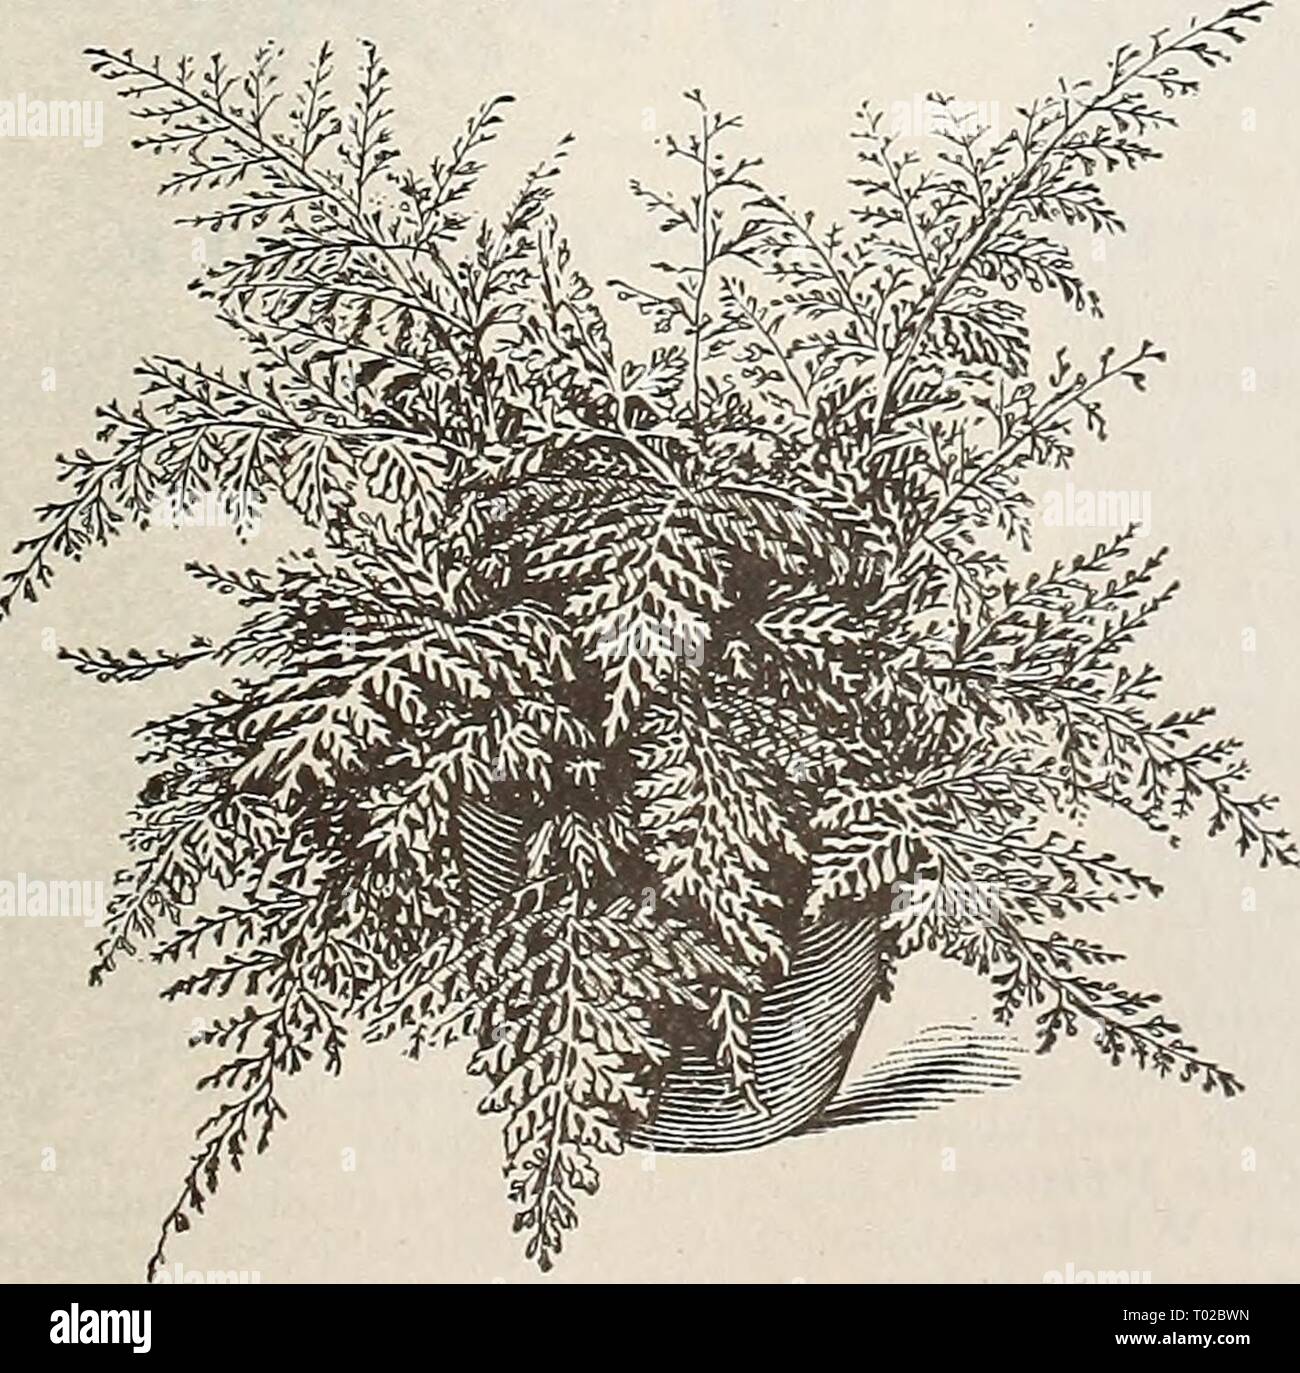 Dreer's garden calendar for 1892 : a catalogue of choice vegetable, field and flower seeds new, rare and beautiful plants garden implements and fertilizers . dreersgardencale1892henr Year: 1892  Splendid Tree Ferns. 50 cts. to $1.00 each.    Davallia Stricta. Lastrea Akistata Variegata. Davallia Fijiensis Majus. Useful for baskets. 25 cts. Davallia Peiltapliylla. A pretty creeping variety, with dark, shining foliage. 50 cts. Davallia Stricta. One of the finest Ferns in cultivation, whether for growing as a decorative plant in the room or planting out; the fronds are of a strong texture and of  Stock Photo